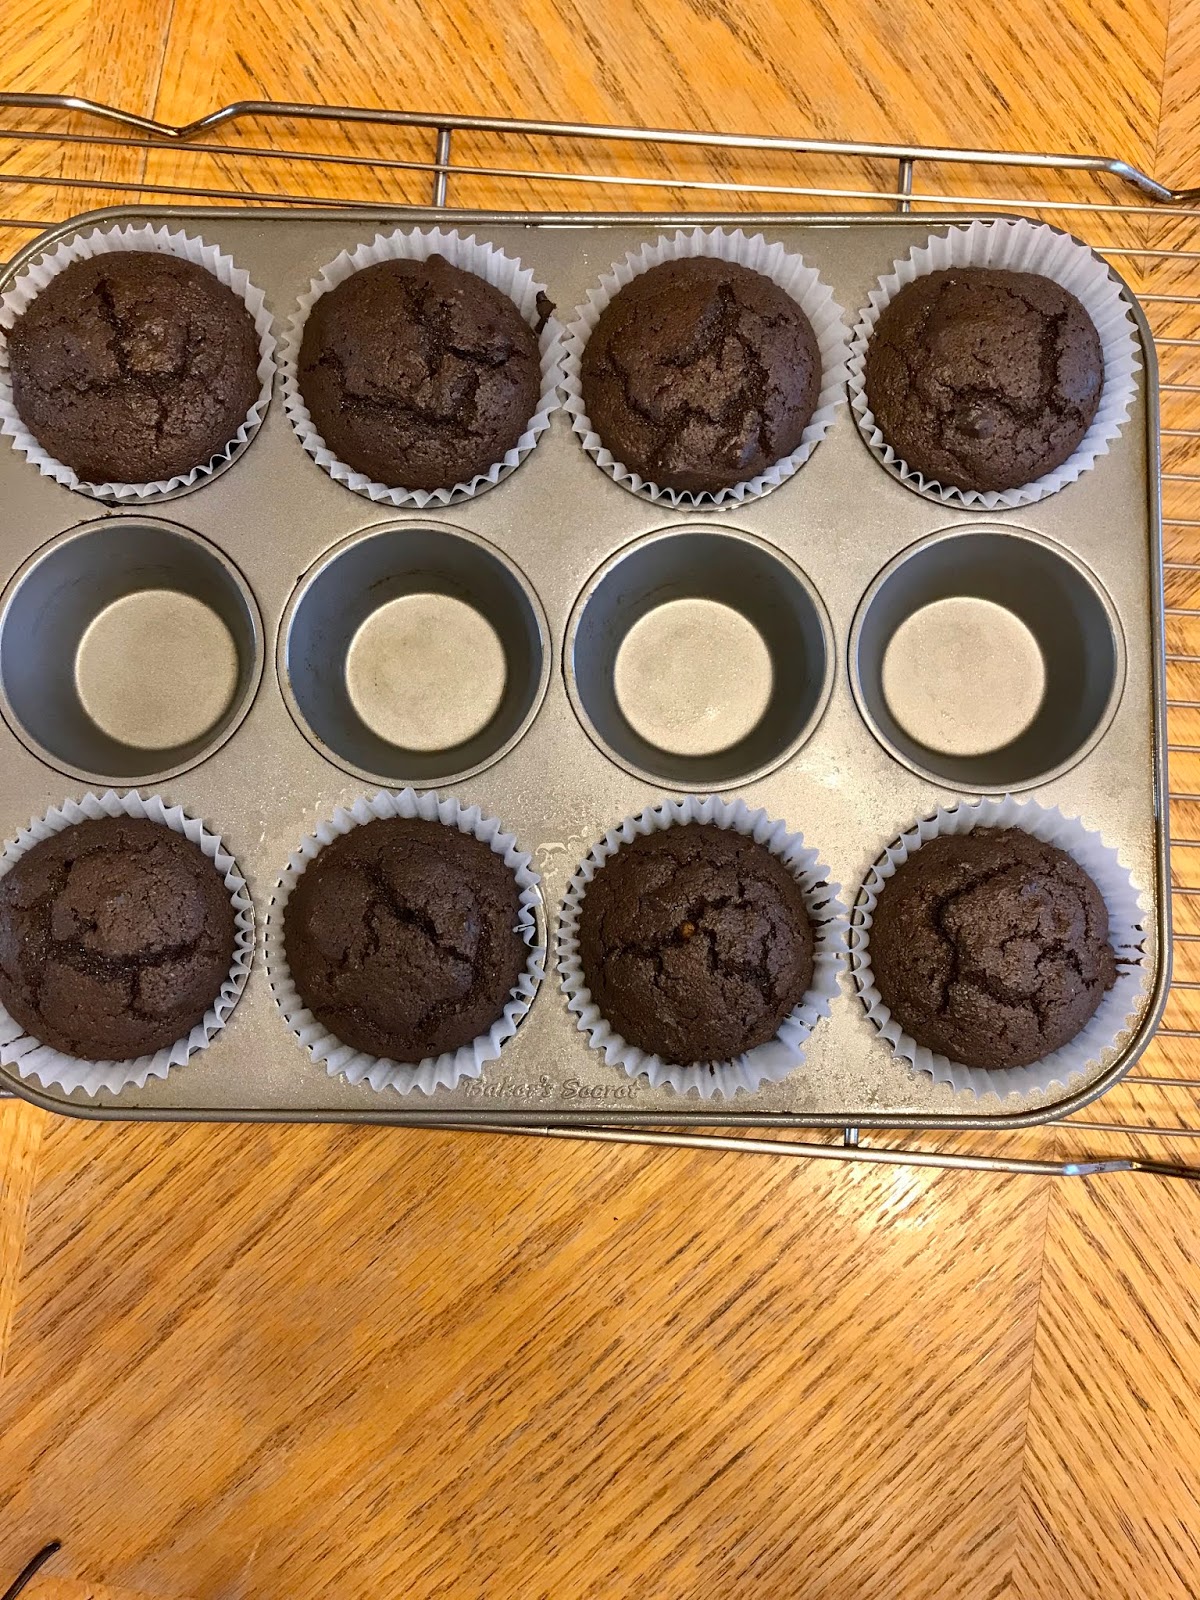 A Taste of Alaska: Apology for being Late to Work and Chocolate Muffins